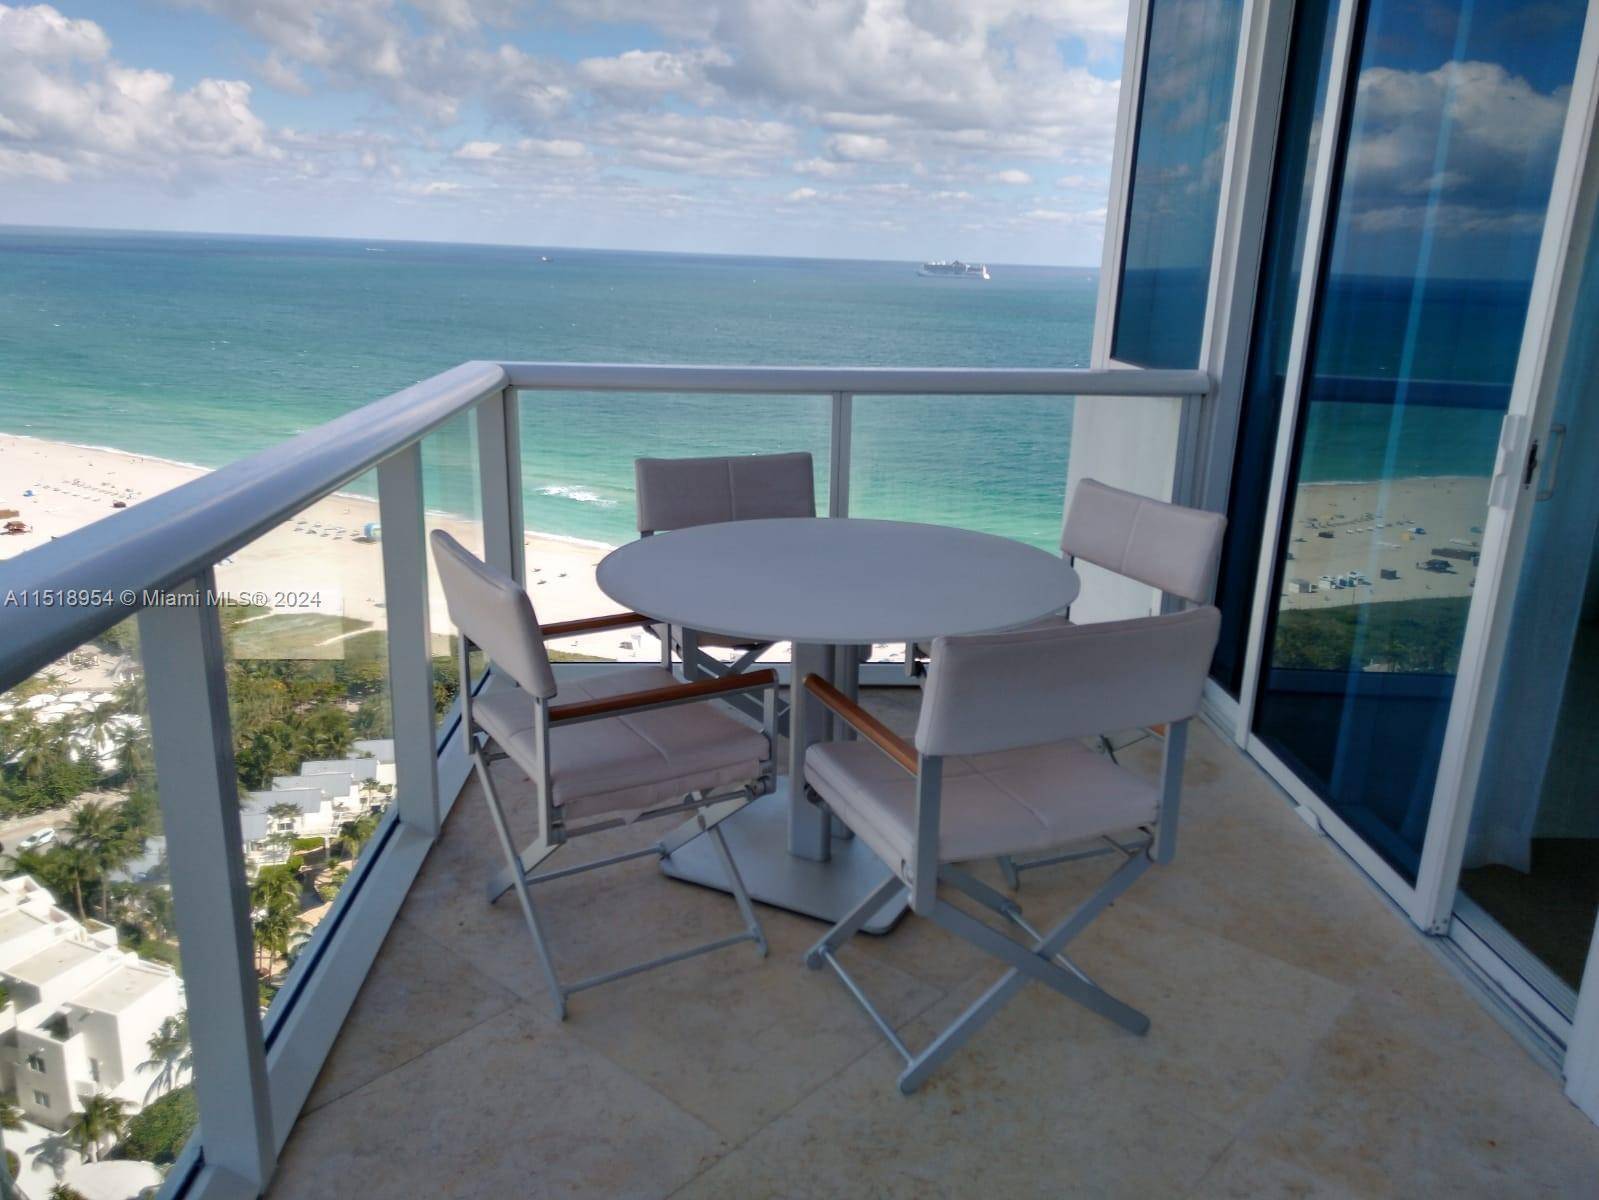 Unit 2509 features 2, 122 sqft of living area, 3 bedrooms 2 enclosed den and 3 full bathrooms, amazing views of the ocean, Miami Beach and Miami skyline.